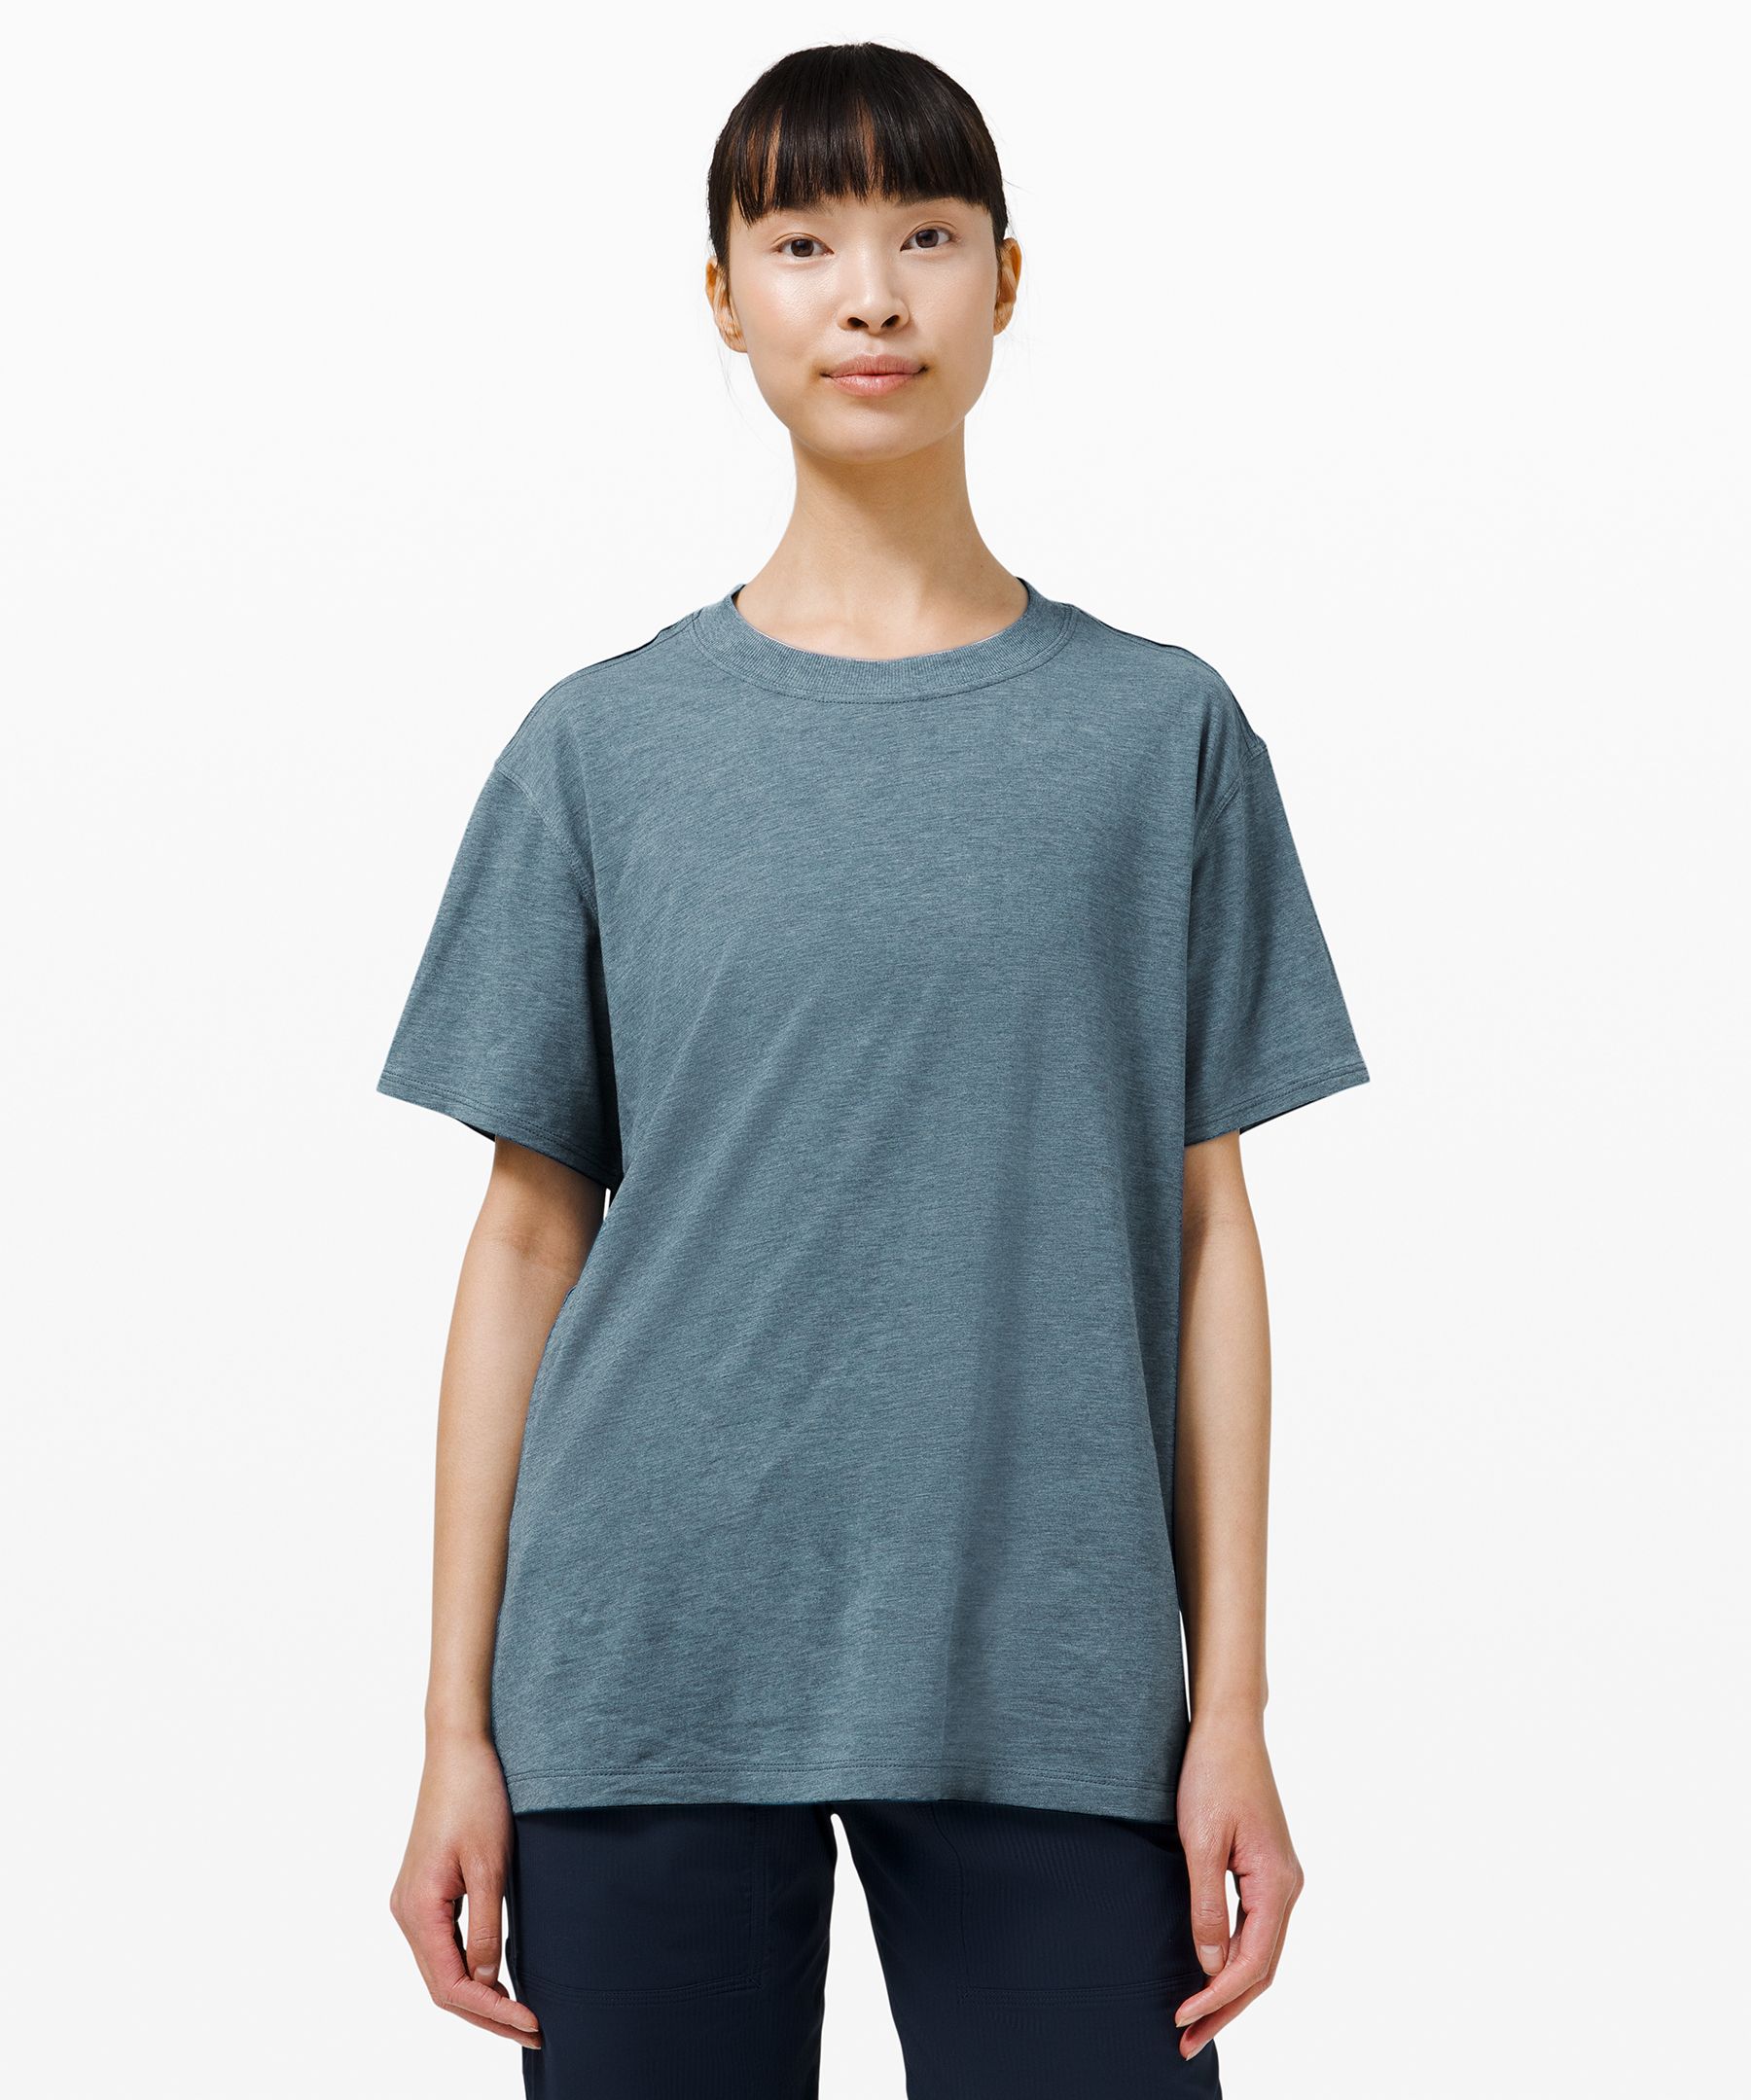 Lululemon All Yours Tee In Navy